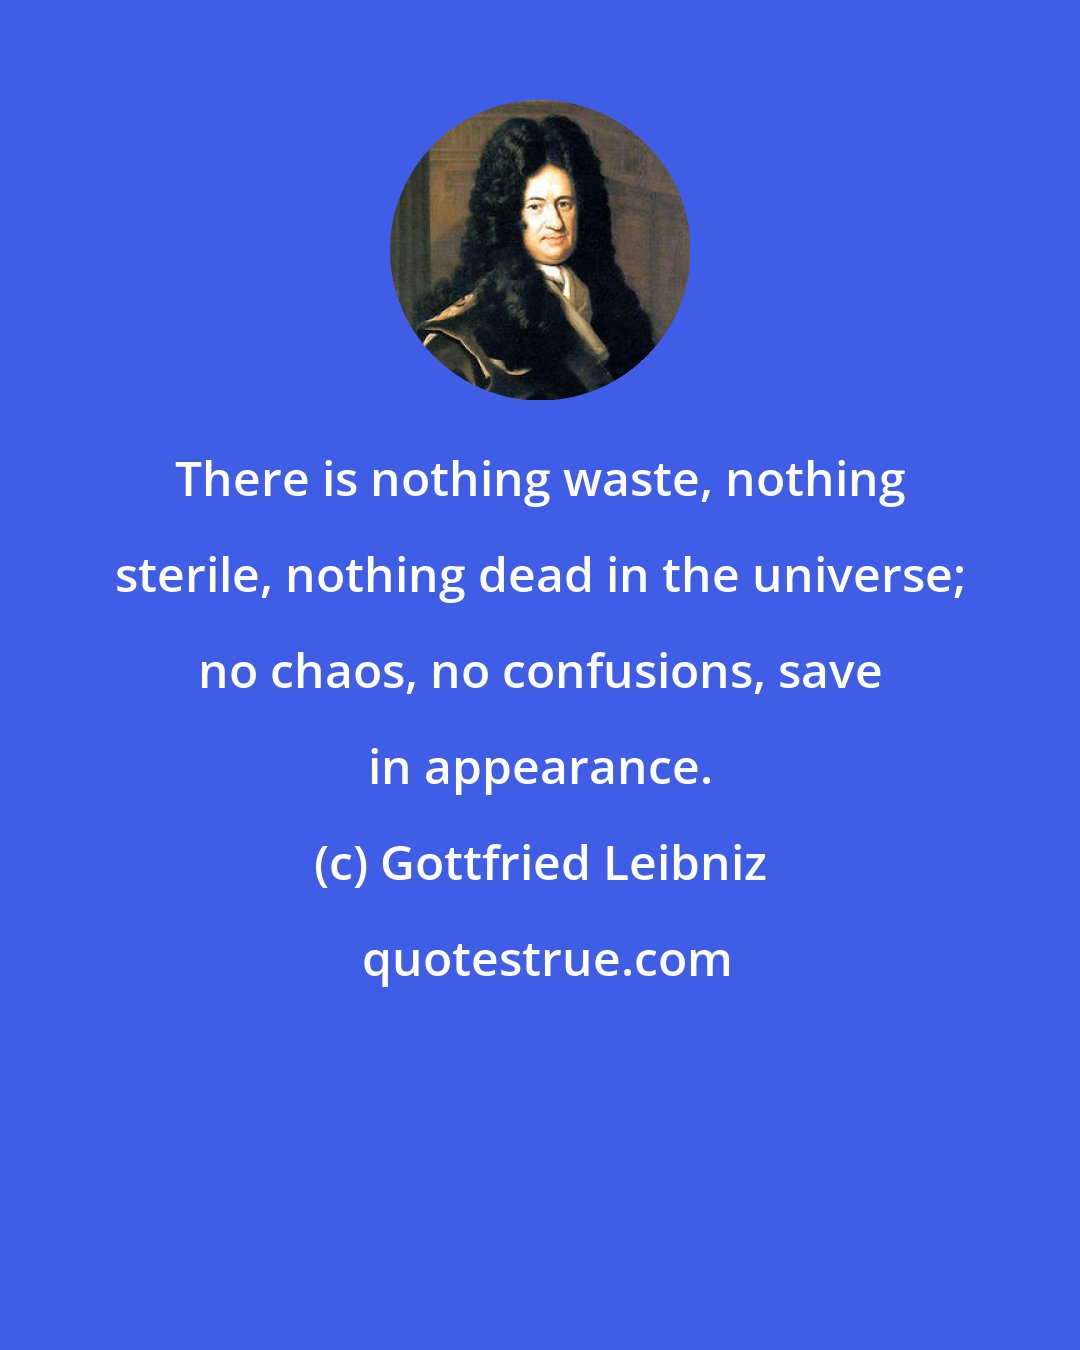 Gottfried Leibniz: There is nothing waste, nothing sterile, nothing dead in the universe; no chaos, no confusions, save in appearance.